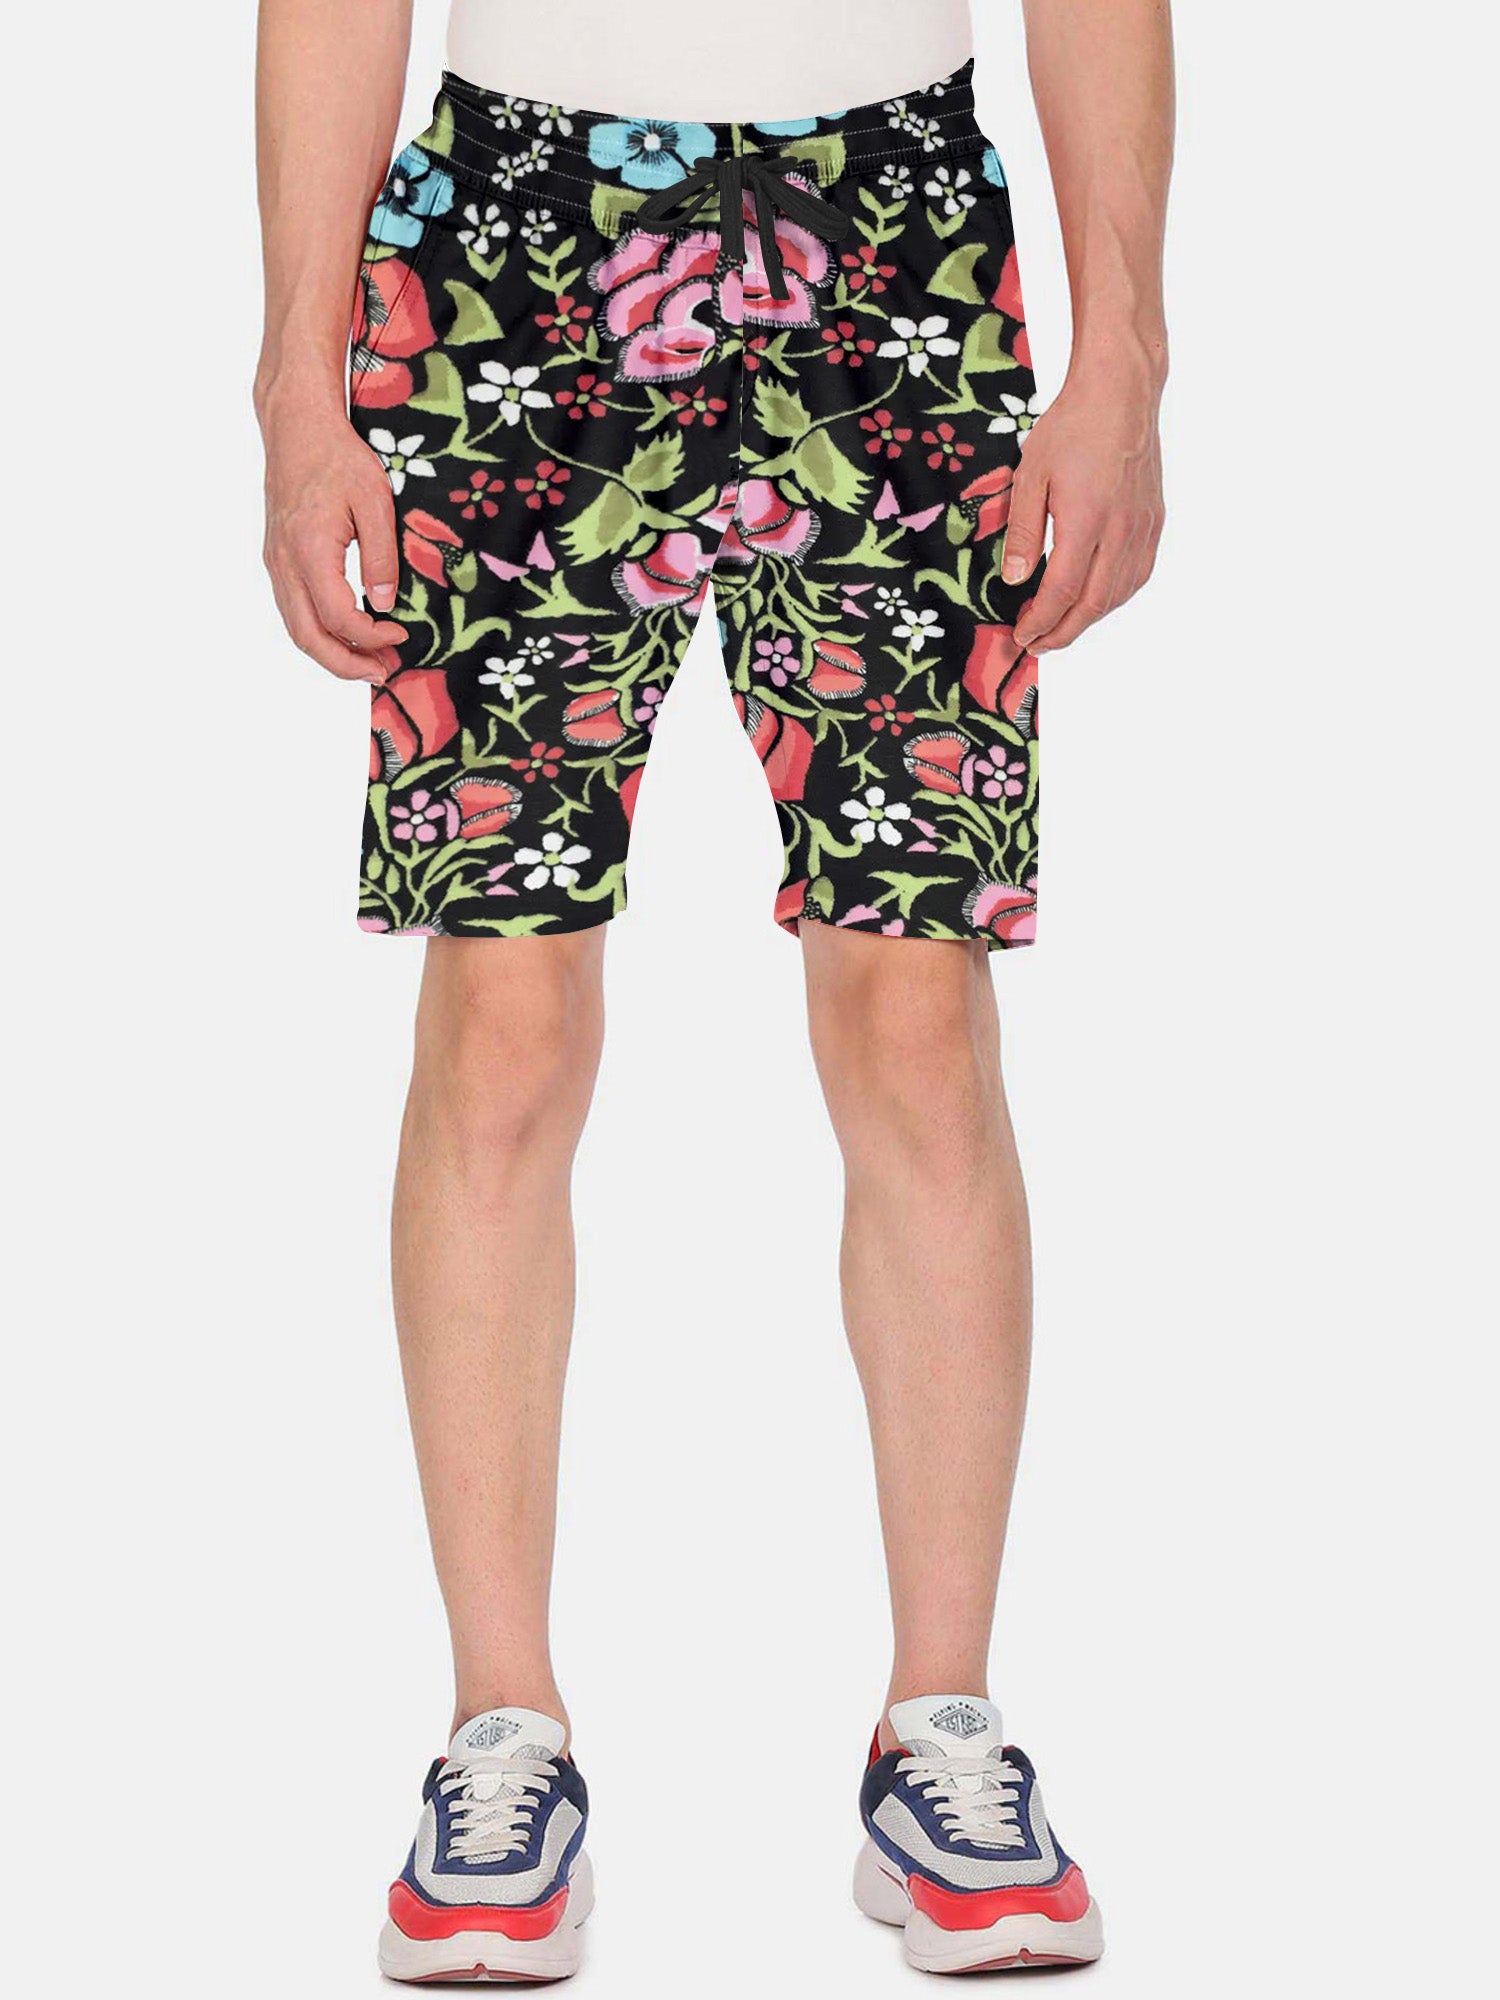 Next Summer Single Jersey Short For Men-Black with Allover Flowers Print-SP2056